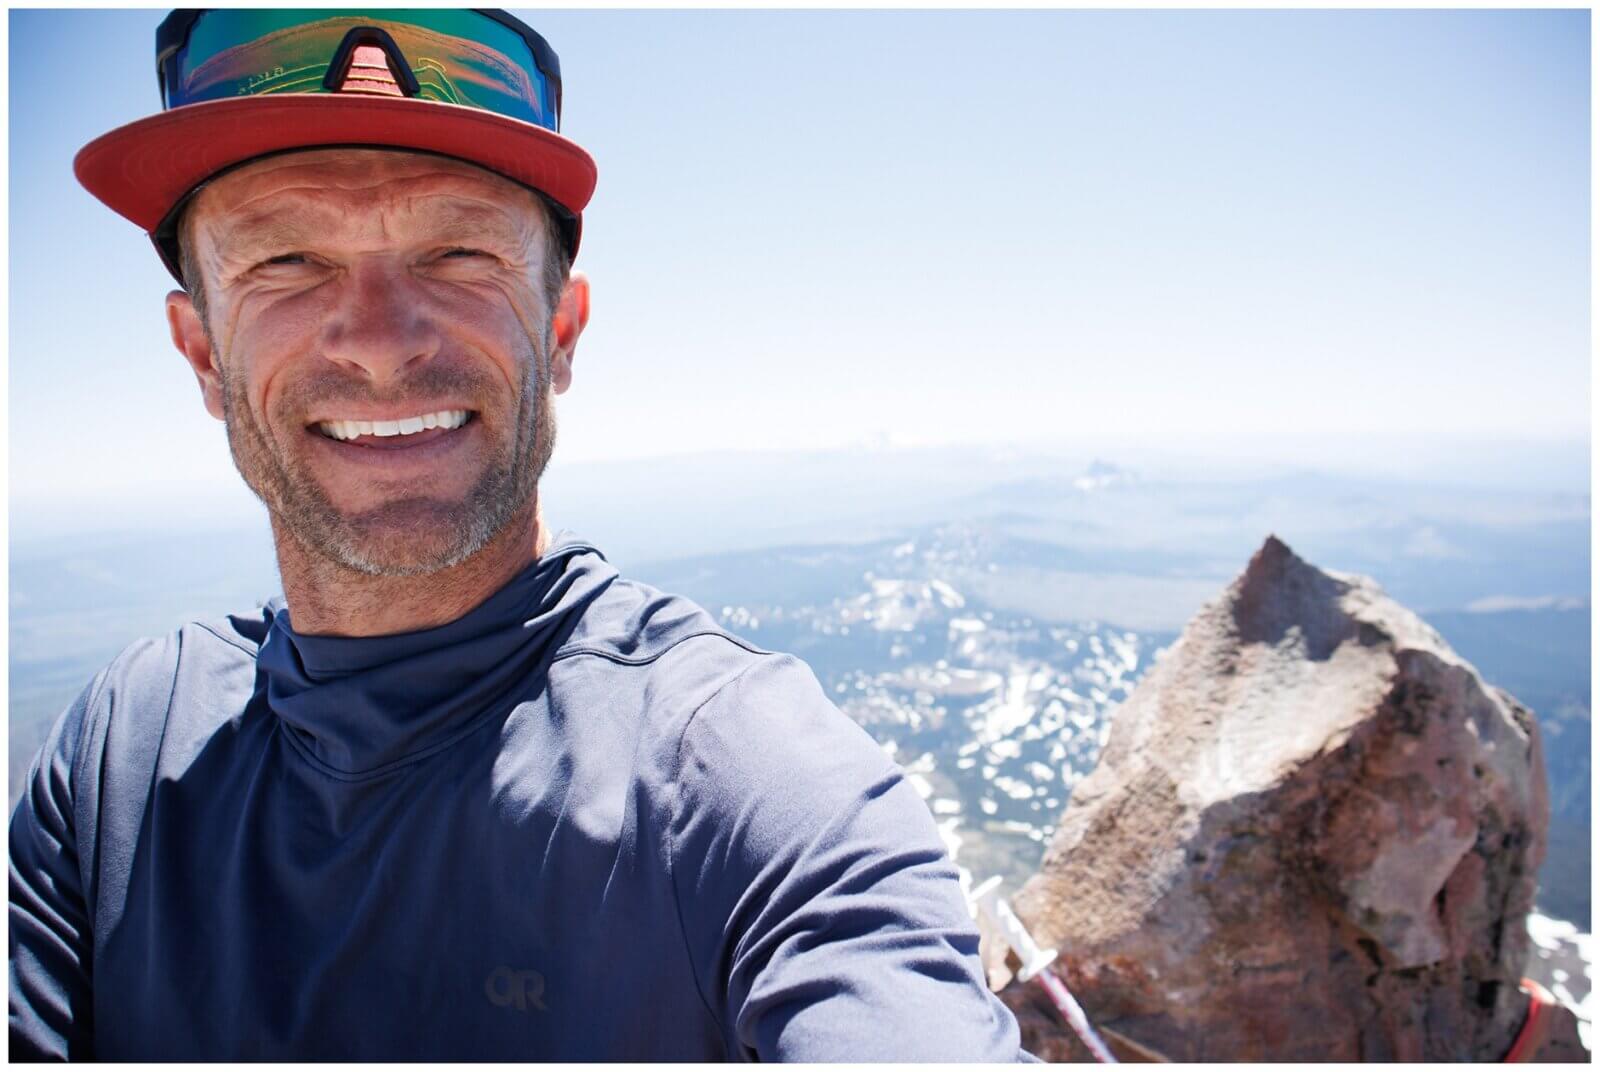 Alpenglow Expeditions' Tahoe Via Ferrata guide Carl Davis standing on the summit of a peak.